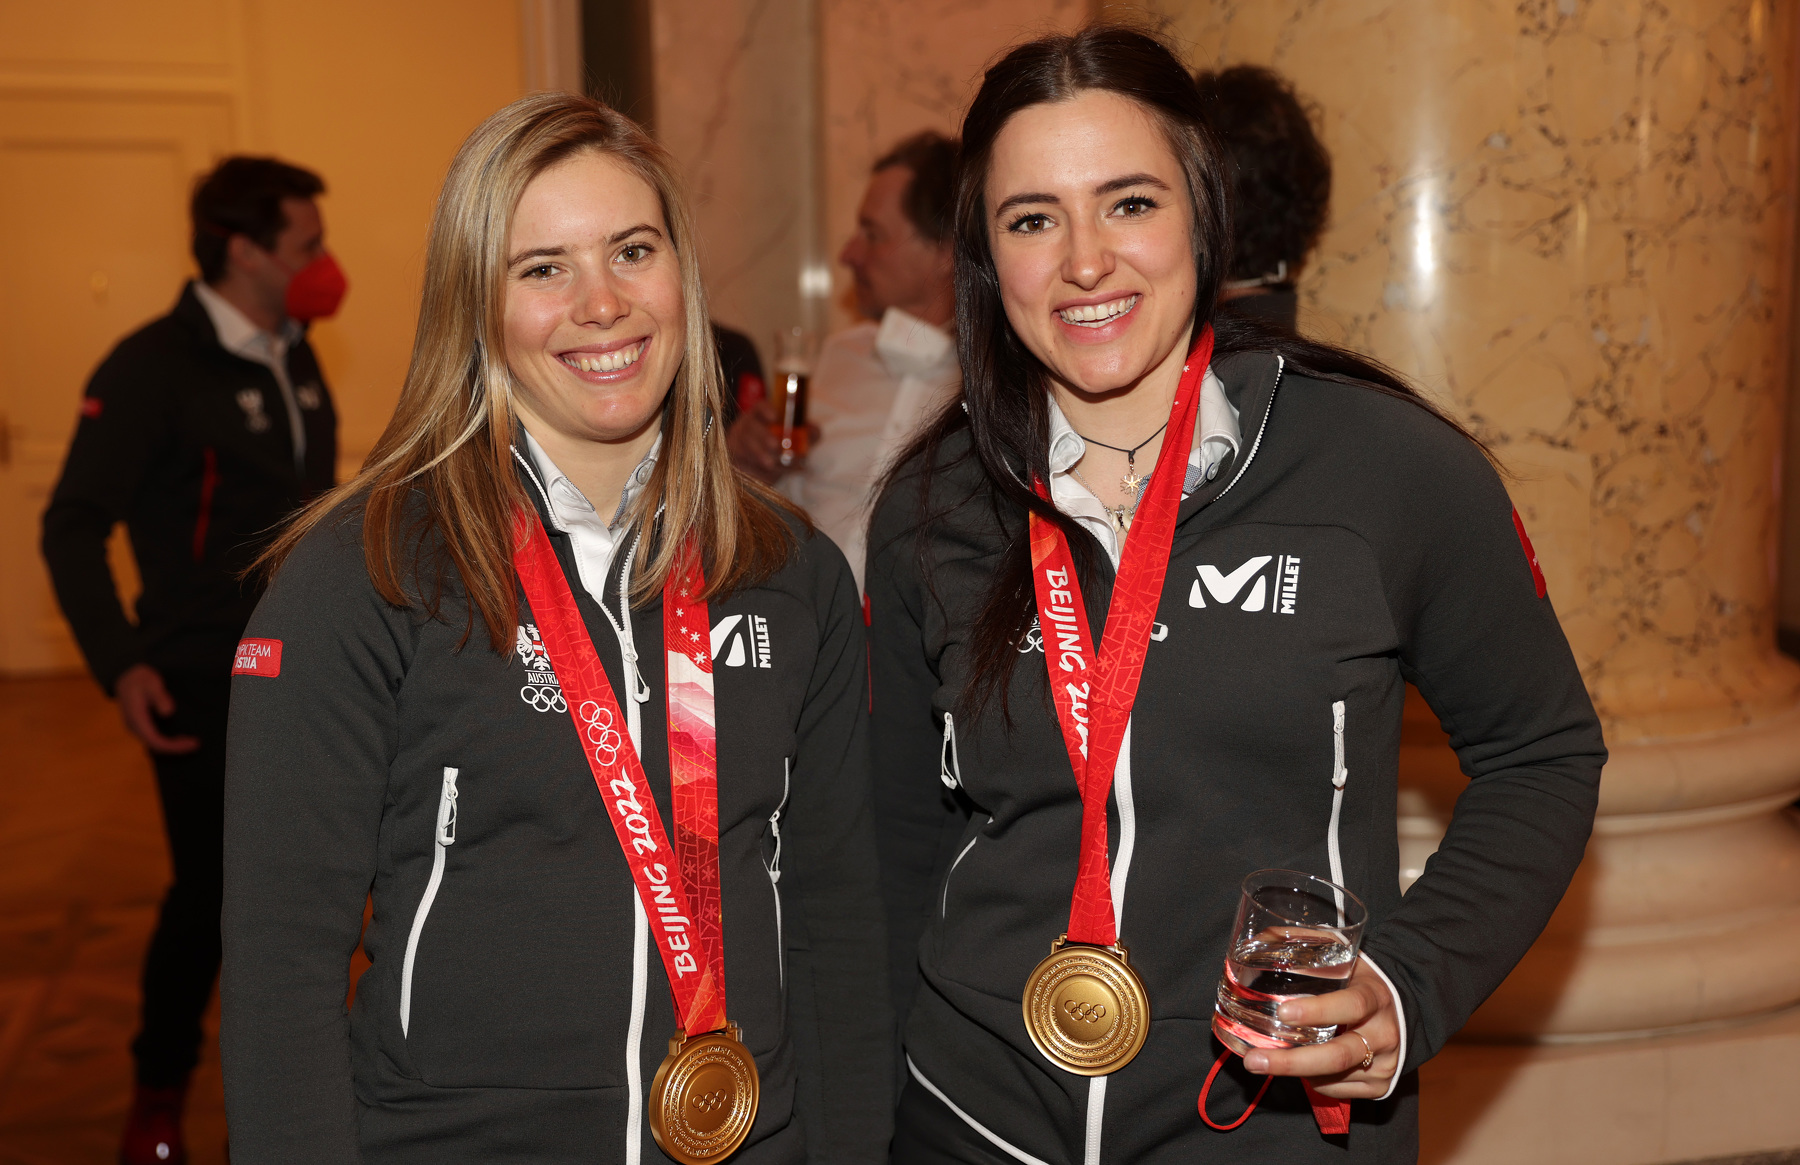 VIENNA,AUSTRIA,22.FEB.22 - OLYMPICS - Winter Olympic Games Beijing 2022, Olympic Team Austria, medal celebration. Image shows Katharina Liensberger and Katharina Huber (AUT). Keywords: medal. Photo: GEPA pictures/ Walter Luger